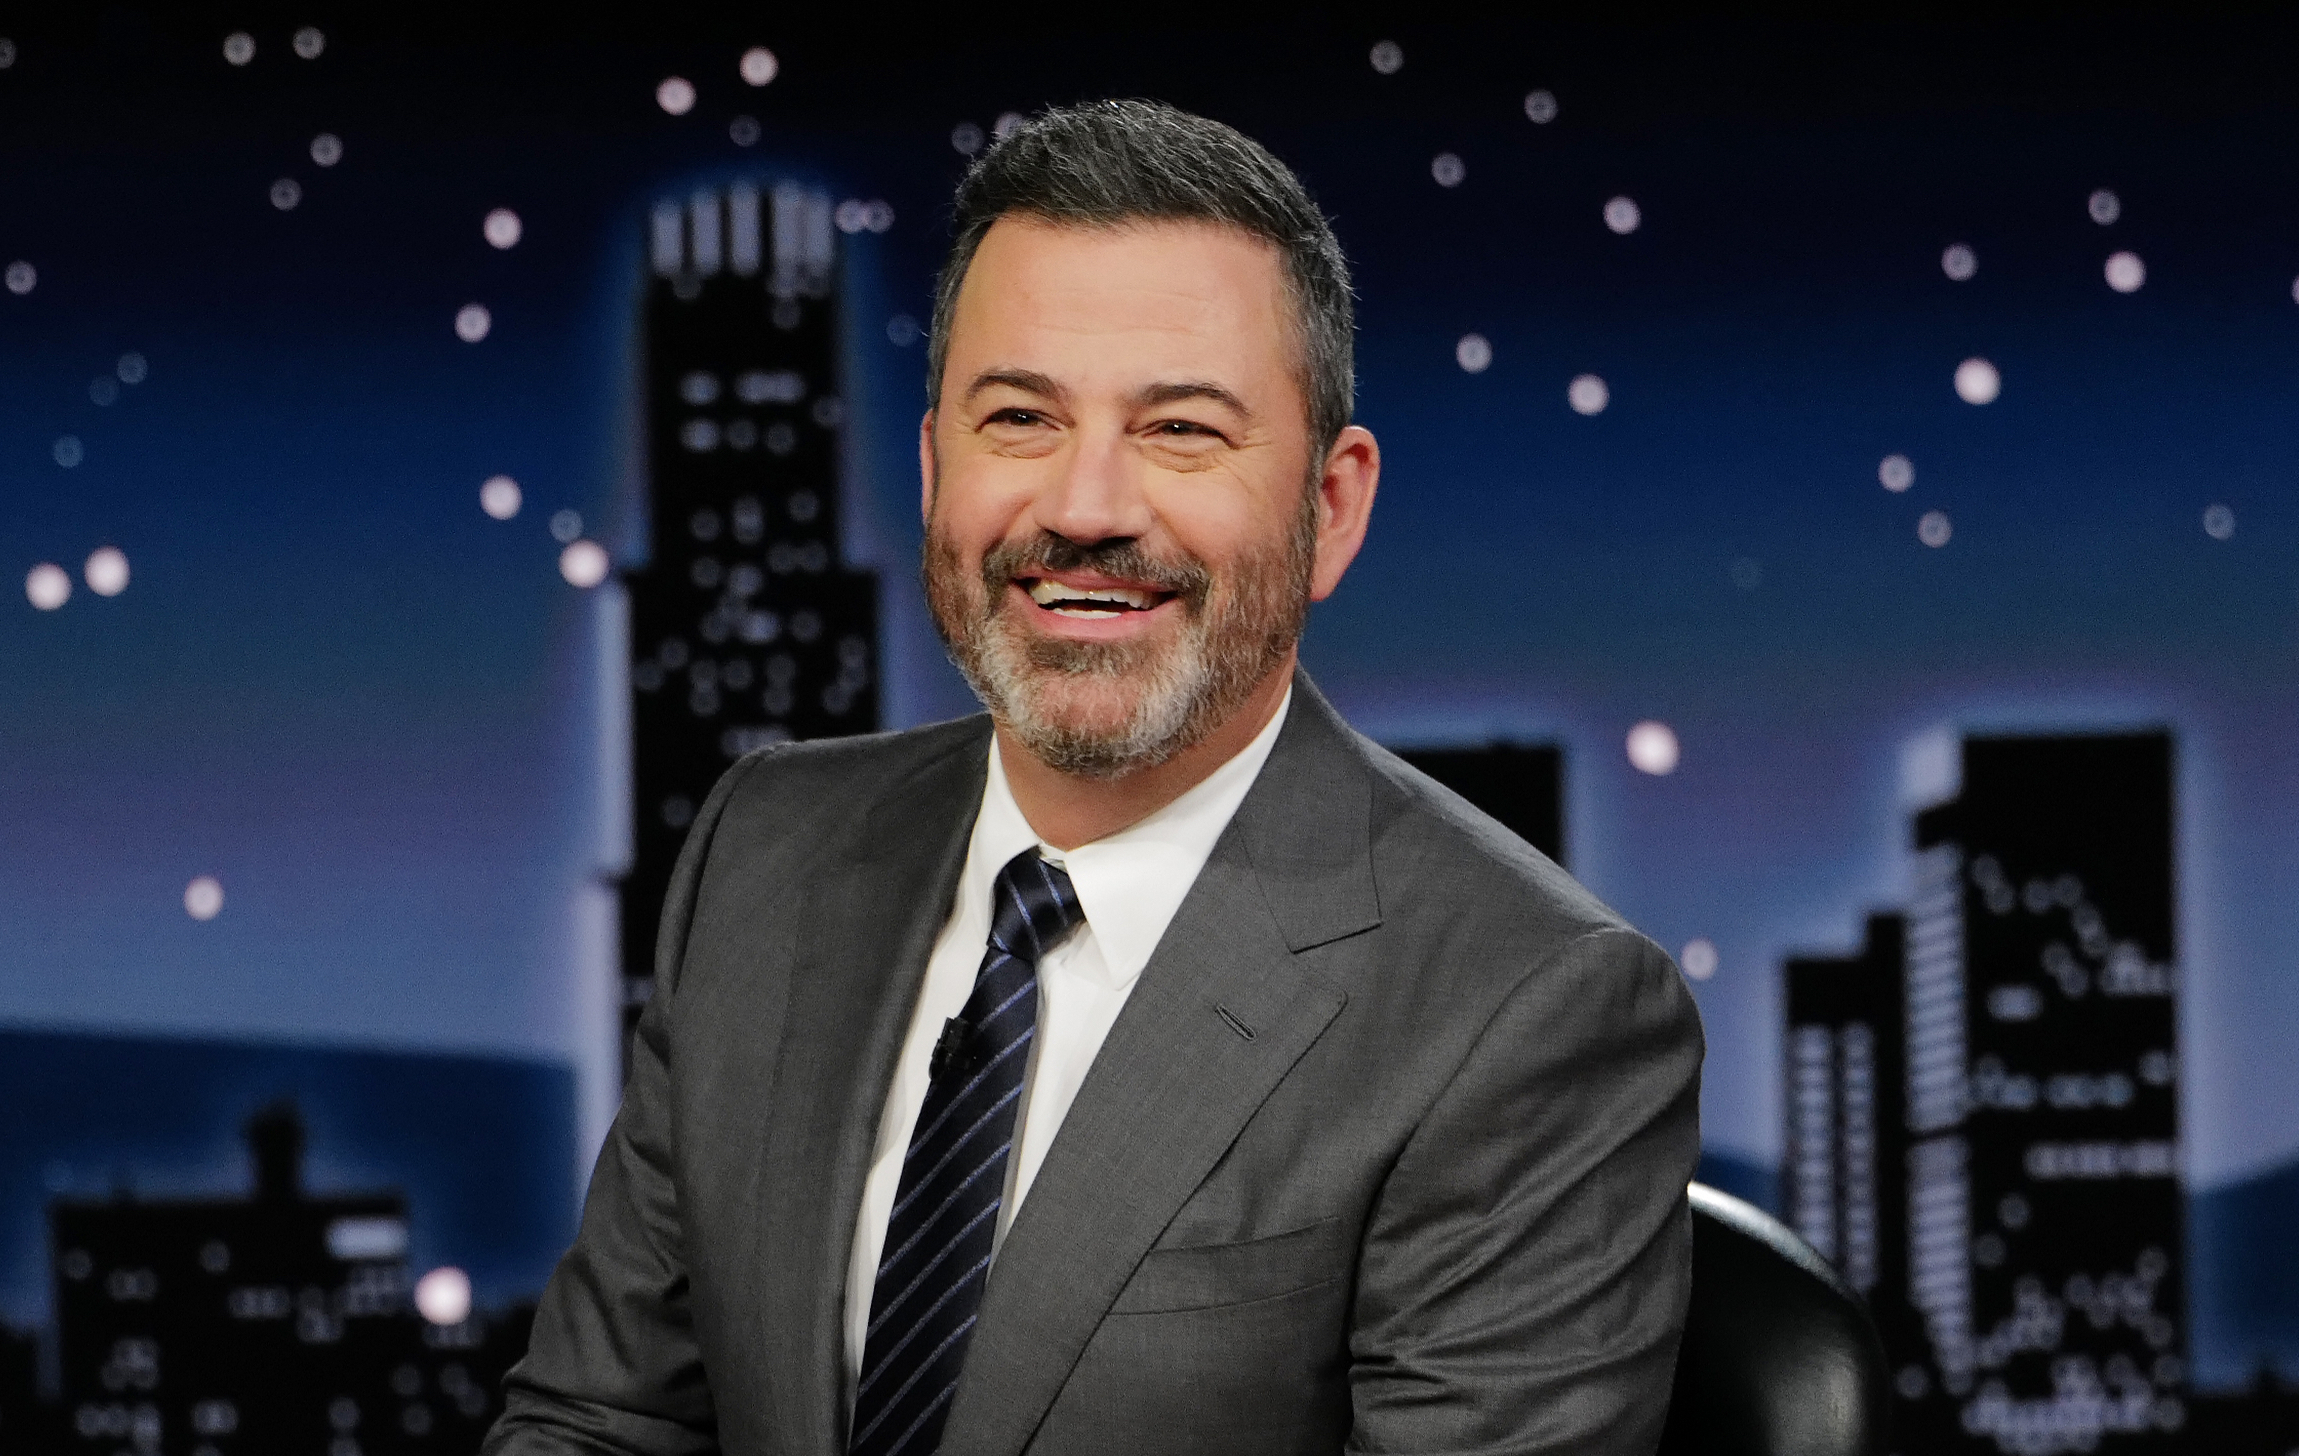 Jimmy Kimmel Calls USA ‘Filthy And Disgusting’ After Traveling To Japan: ‘We Are Like Hogs Compared To The Japanese’